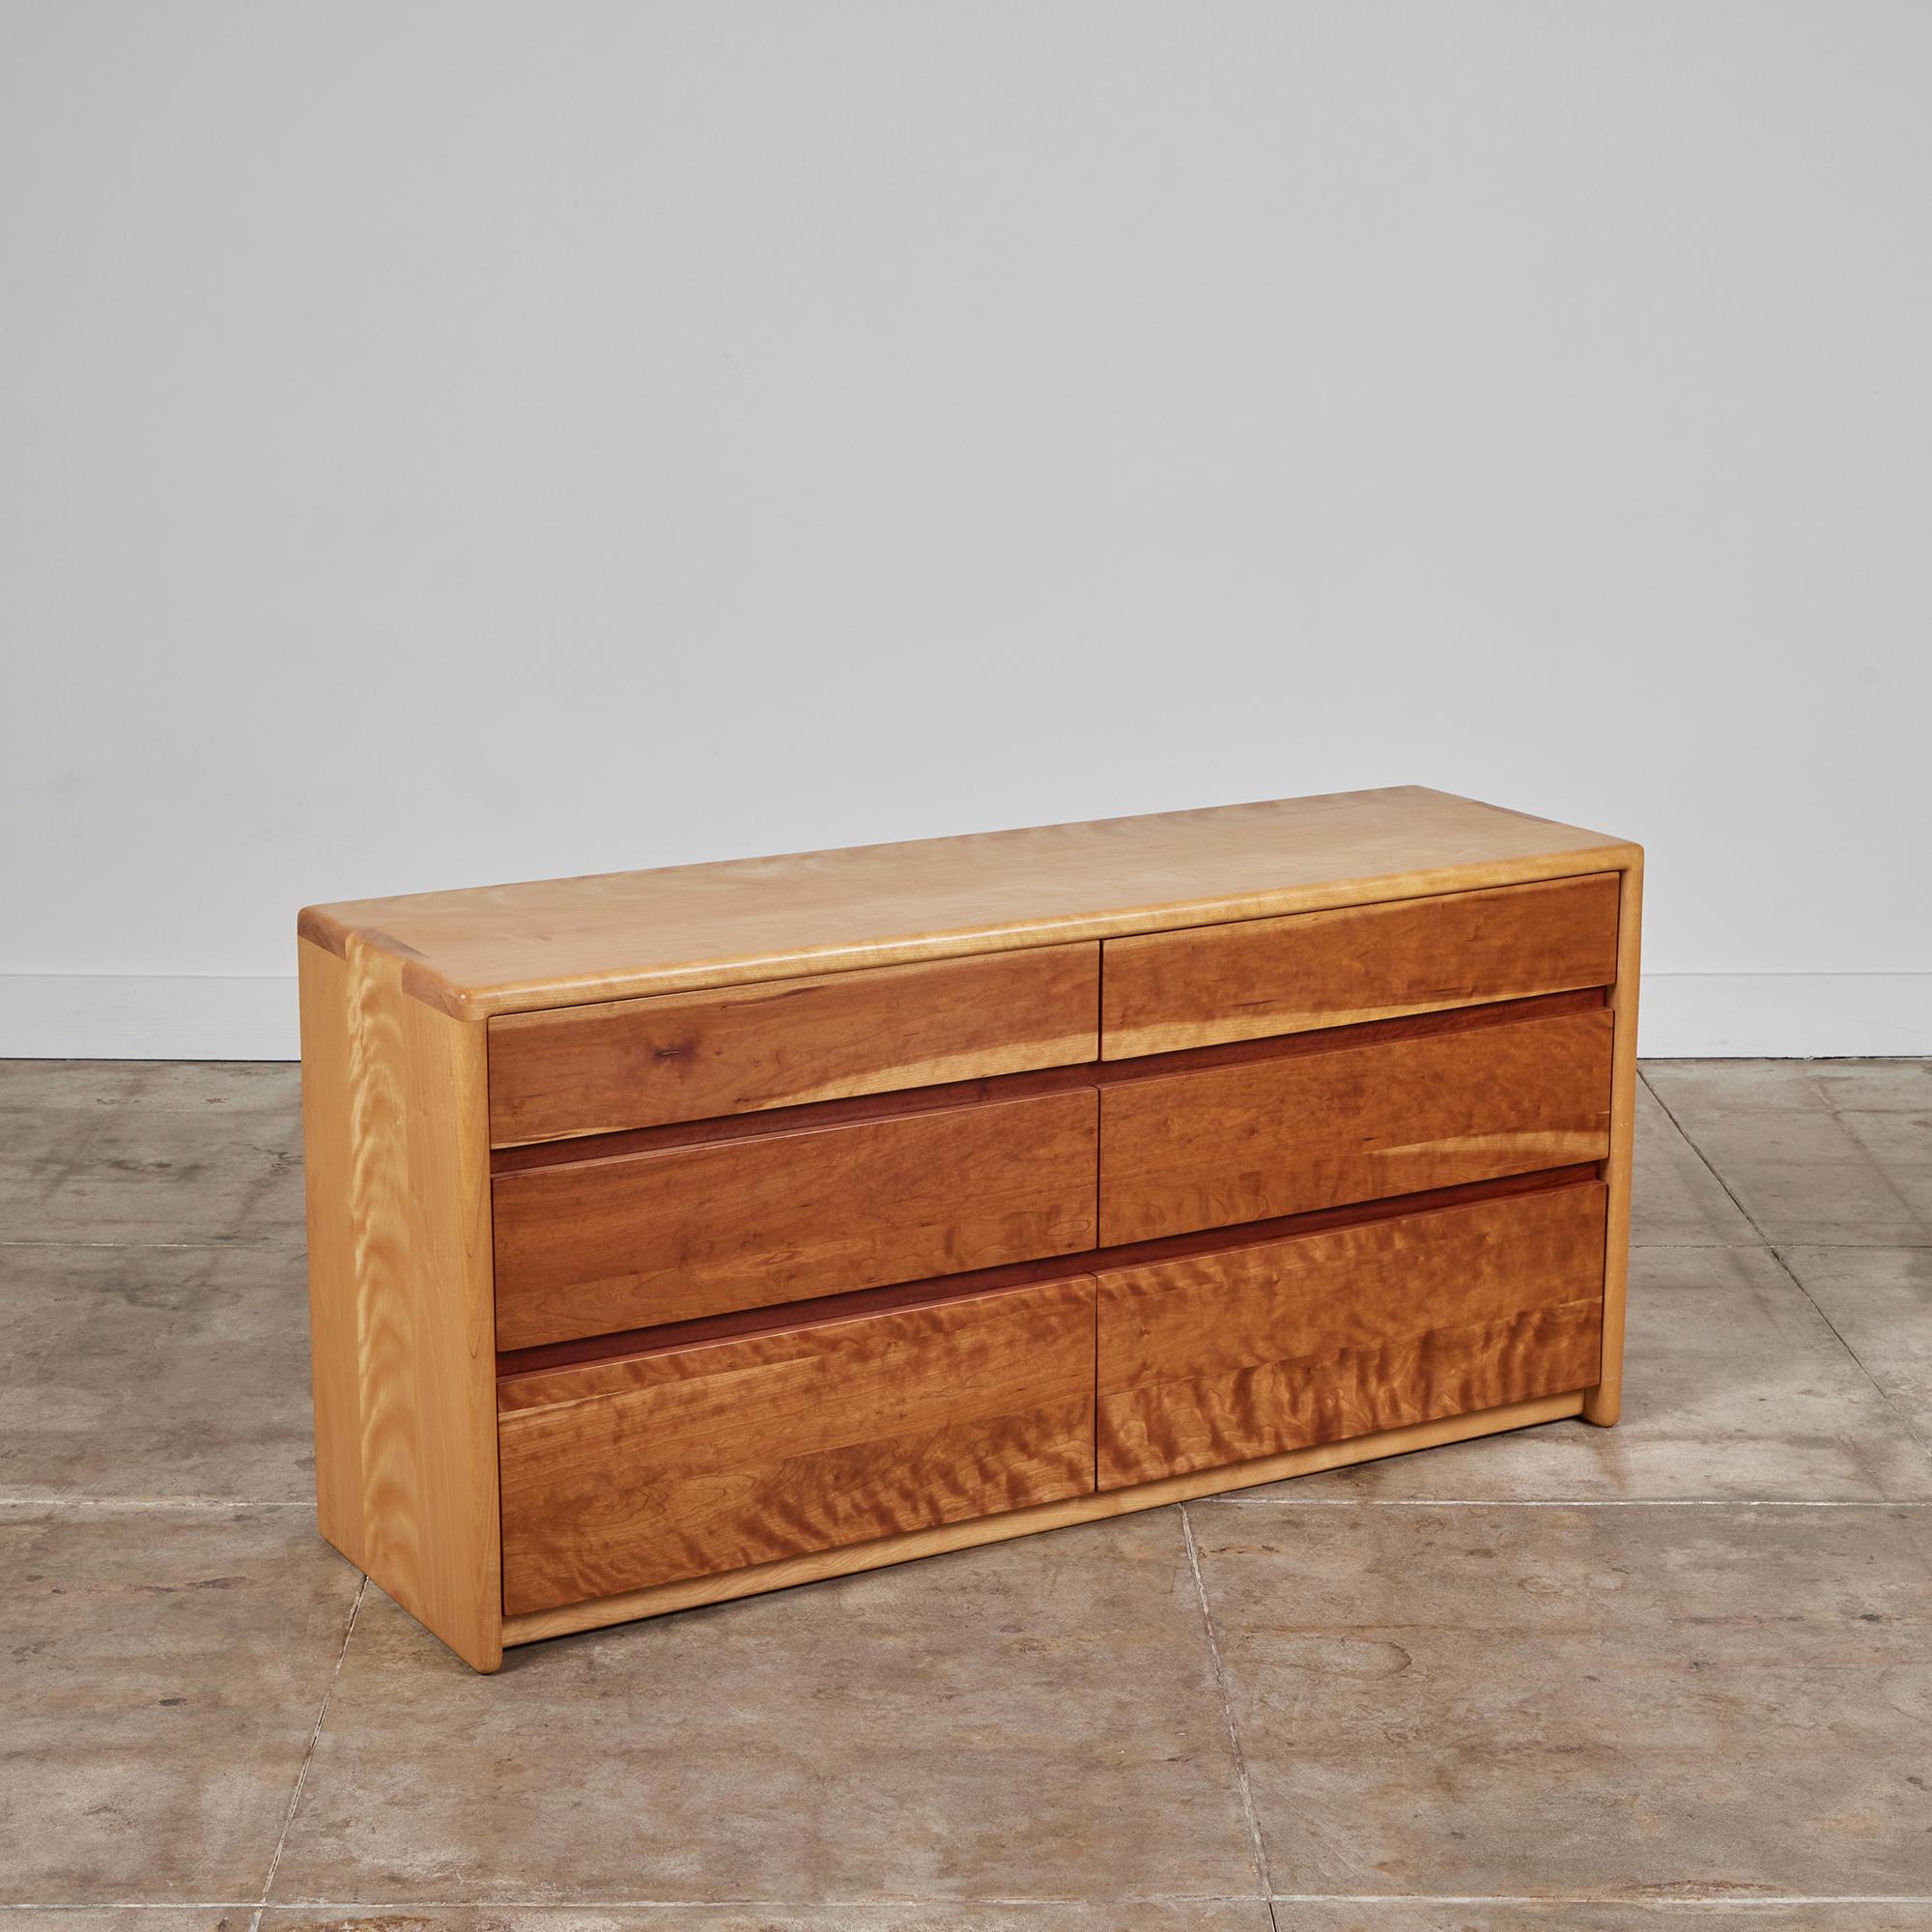 Dresser by Gerald McCabe for Eon Furniture, c.1997, USA. The maple framed wood dresser, features soft rounded edges with finger joint detailing at the edges. The six flat front drawers feature shedua wood. This piece is personally signed by McCabe